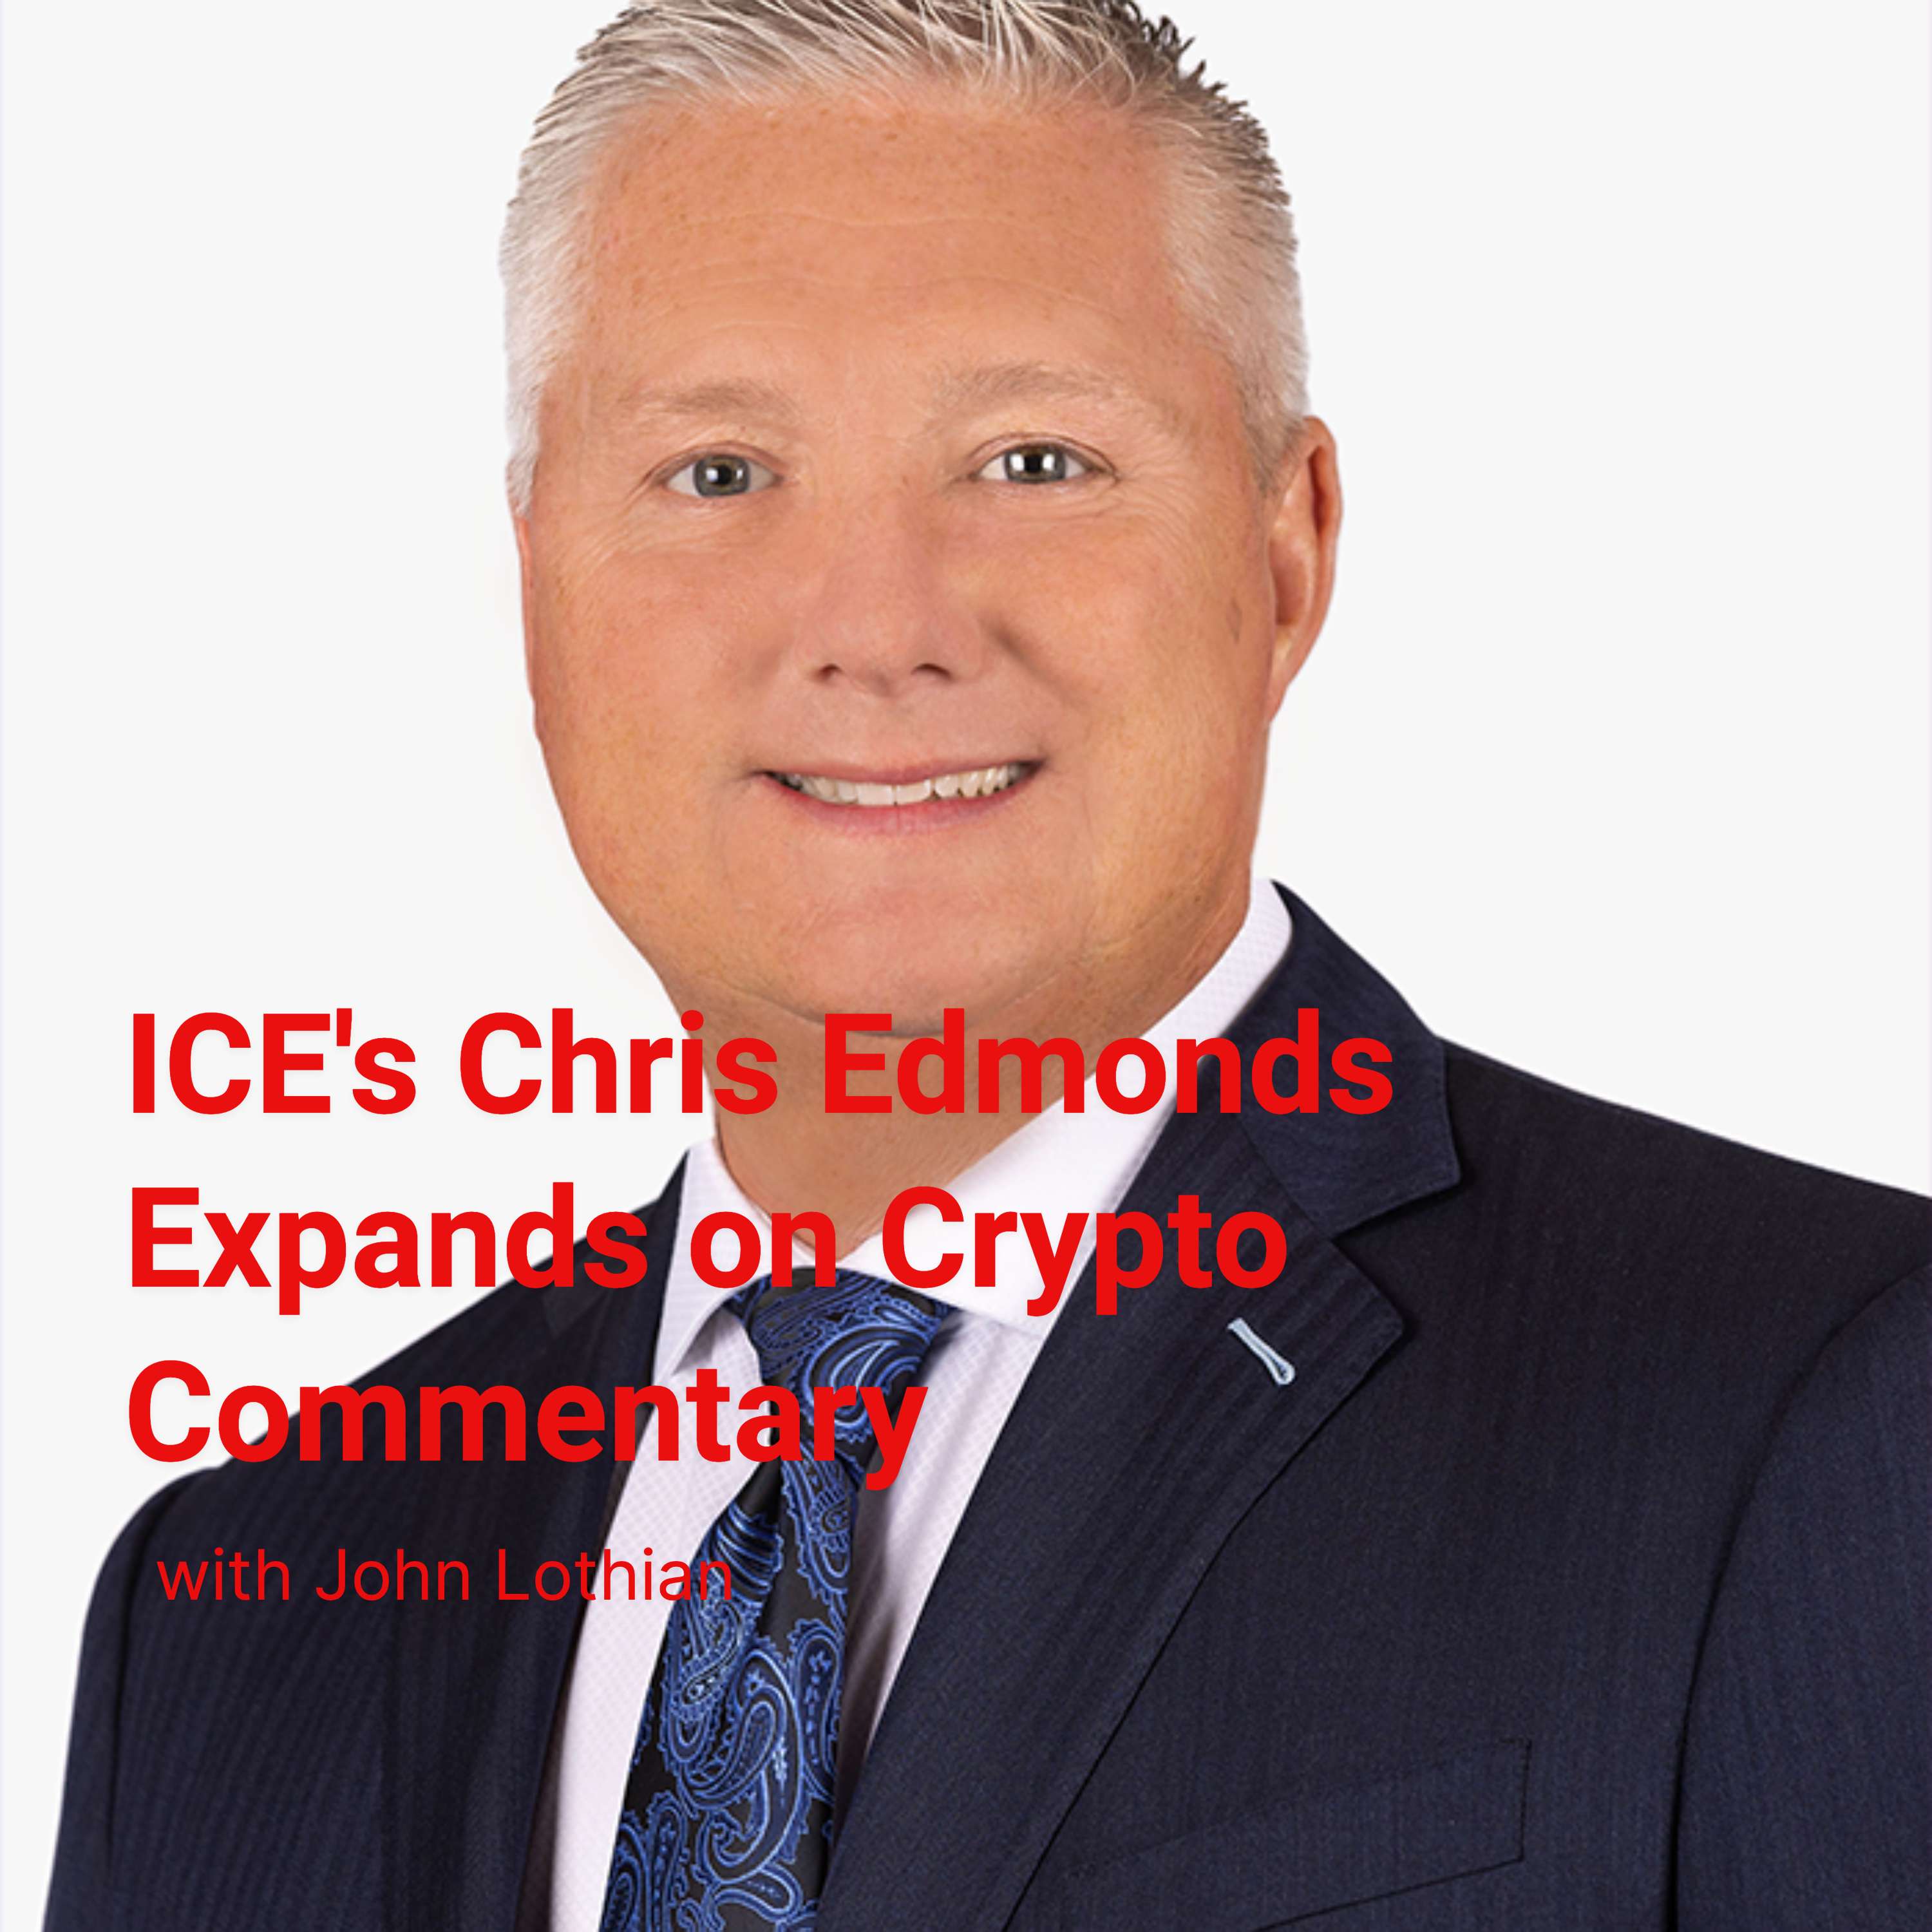 ICE's Chris Edmonds Expands on Crypto Commentary in JLN Video Interview